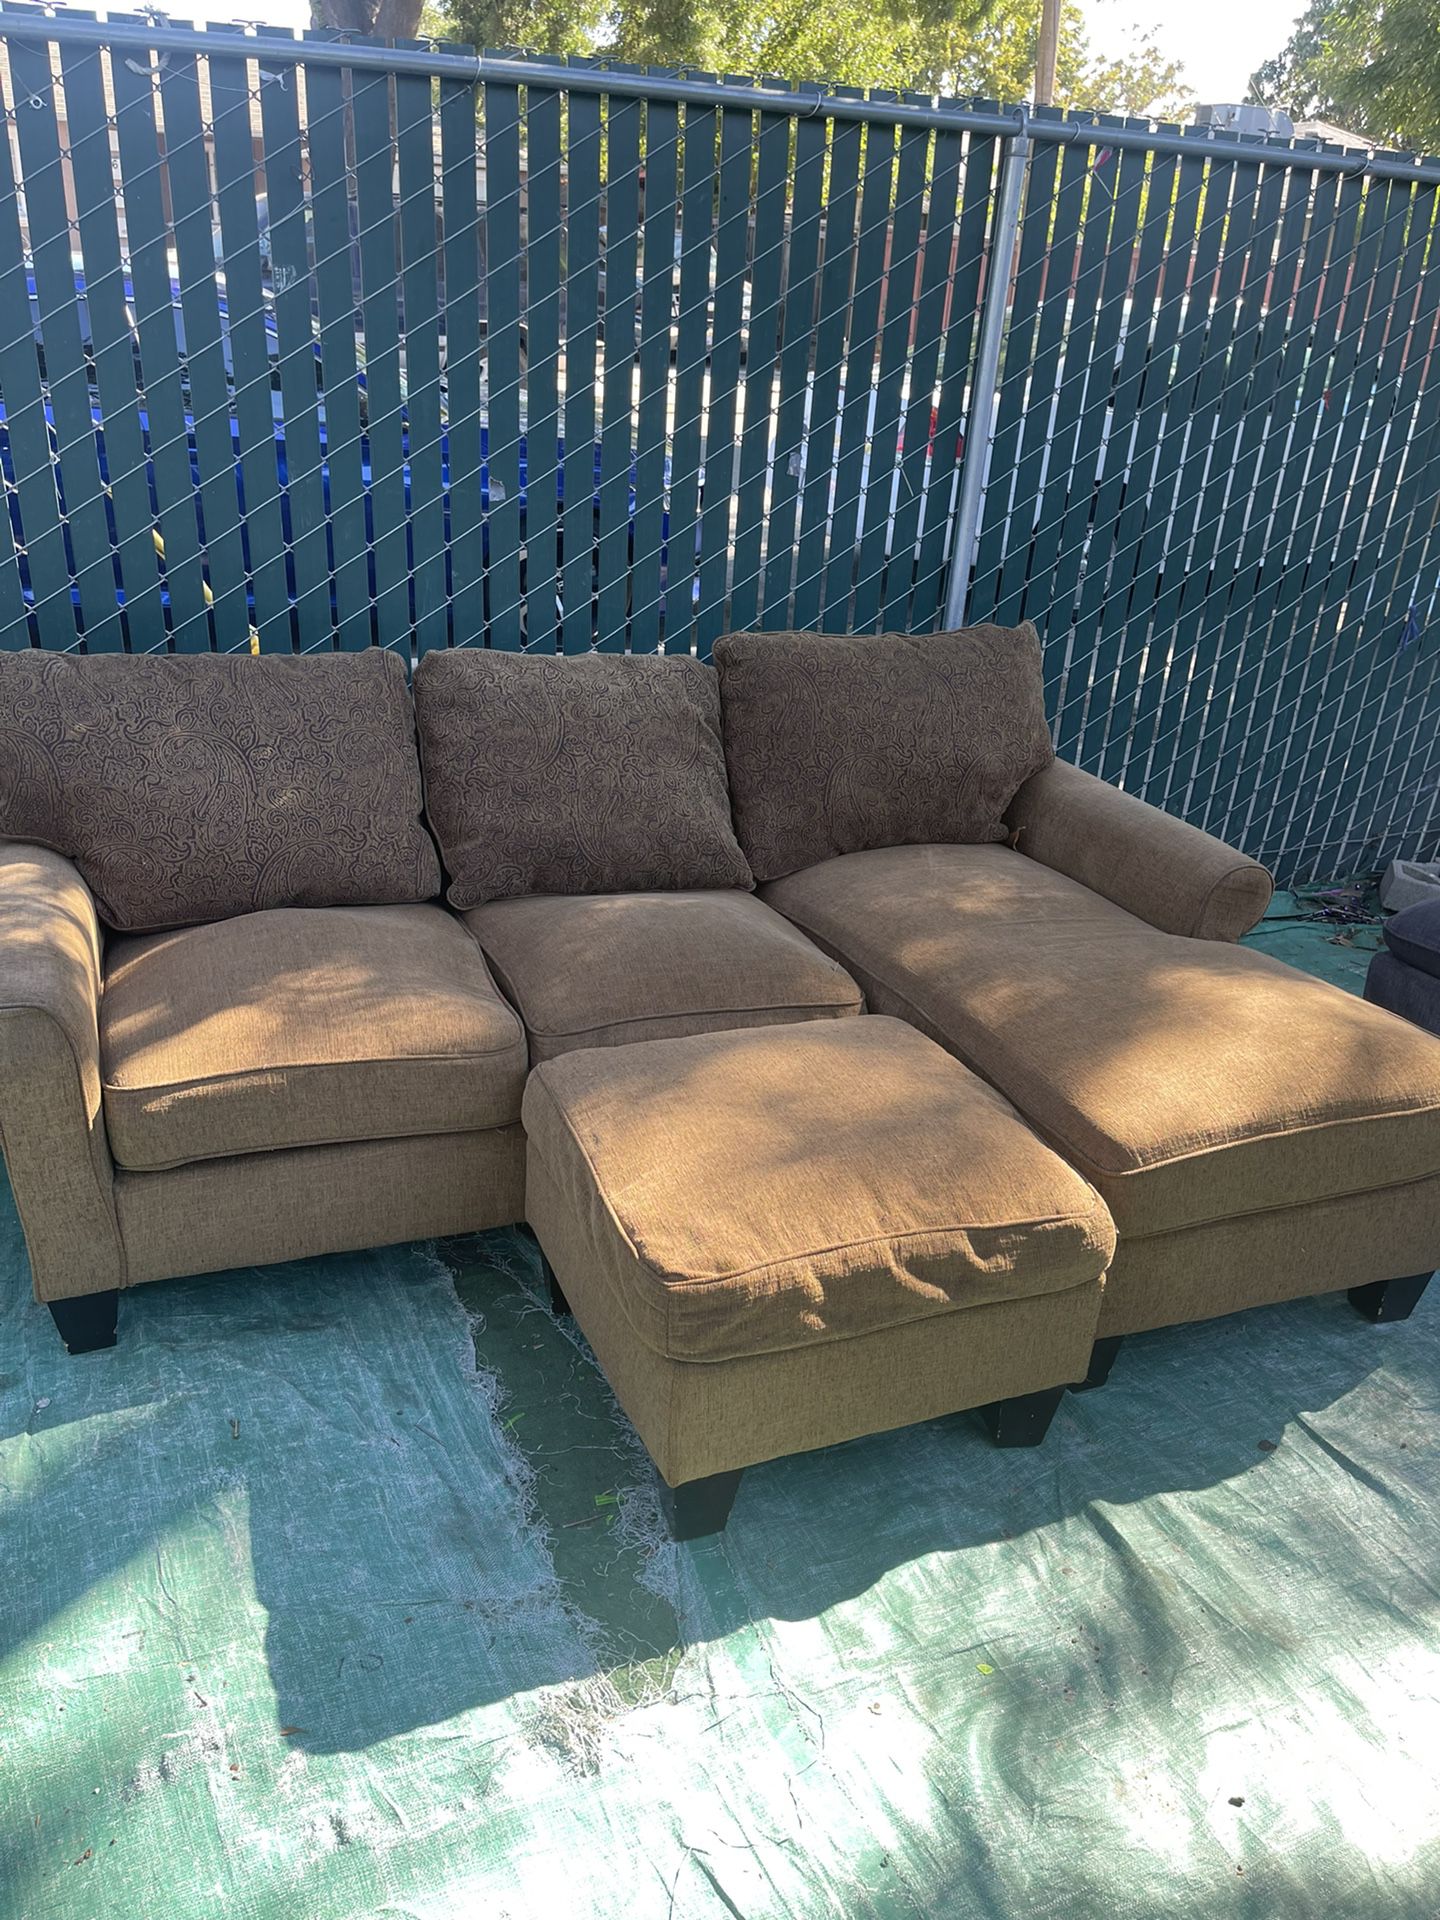 Small smoke-free pet free sectional couch very clean